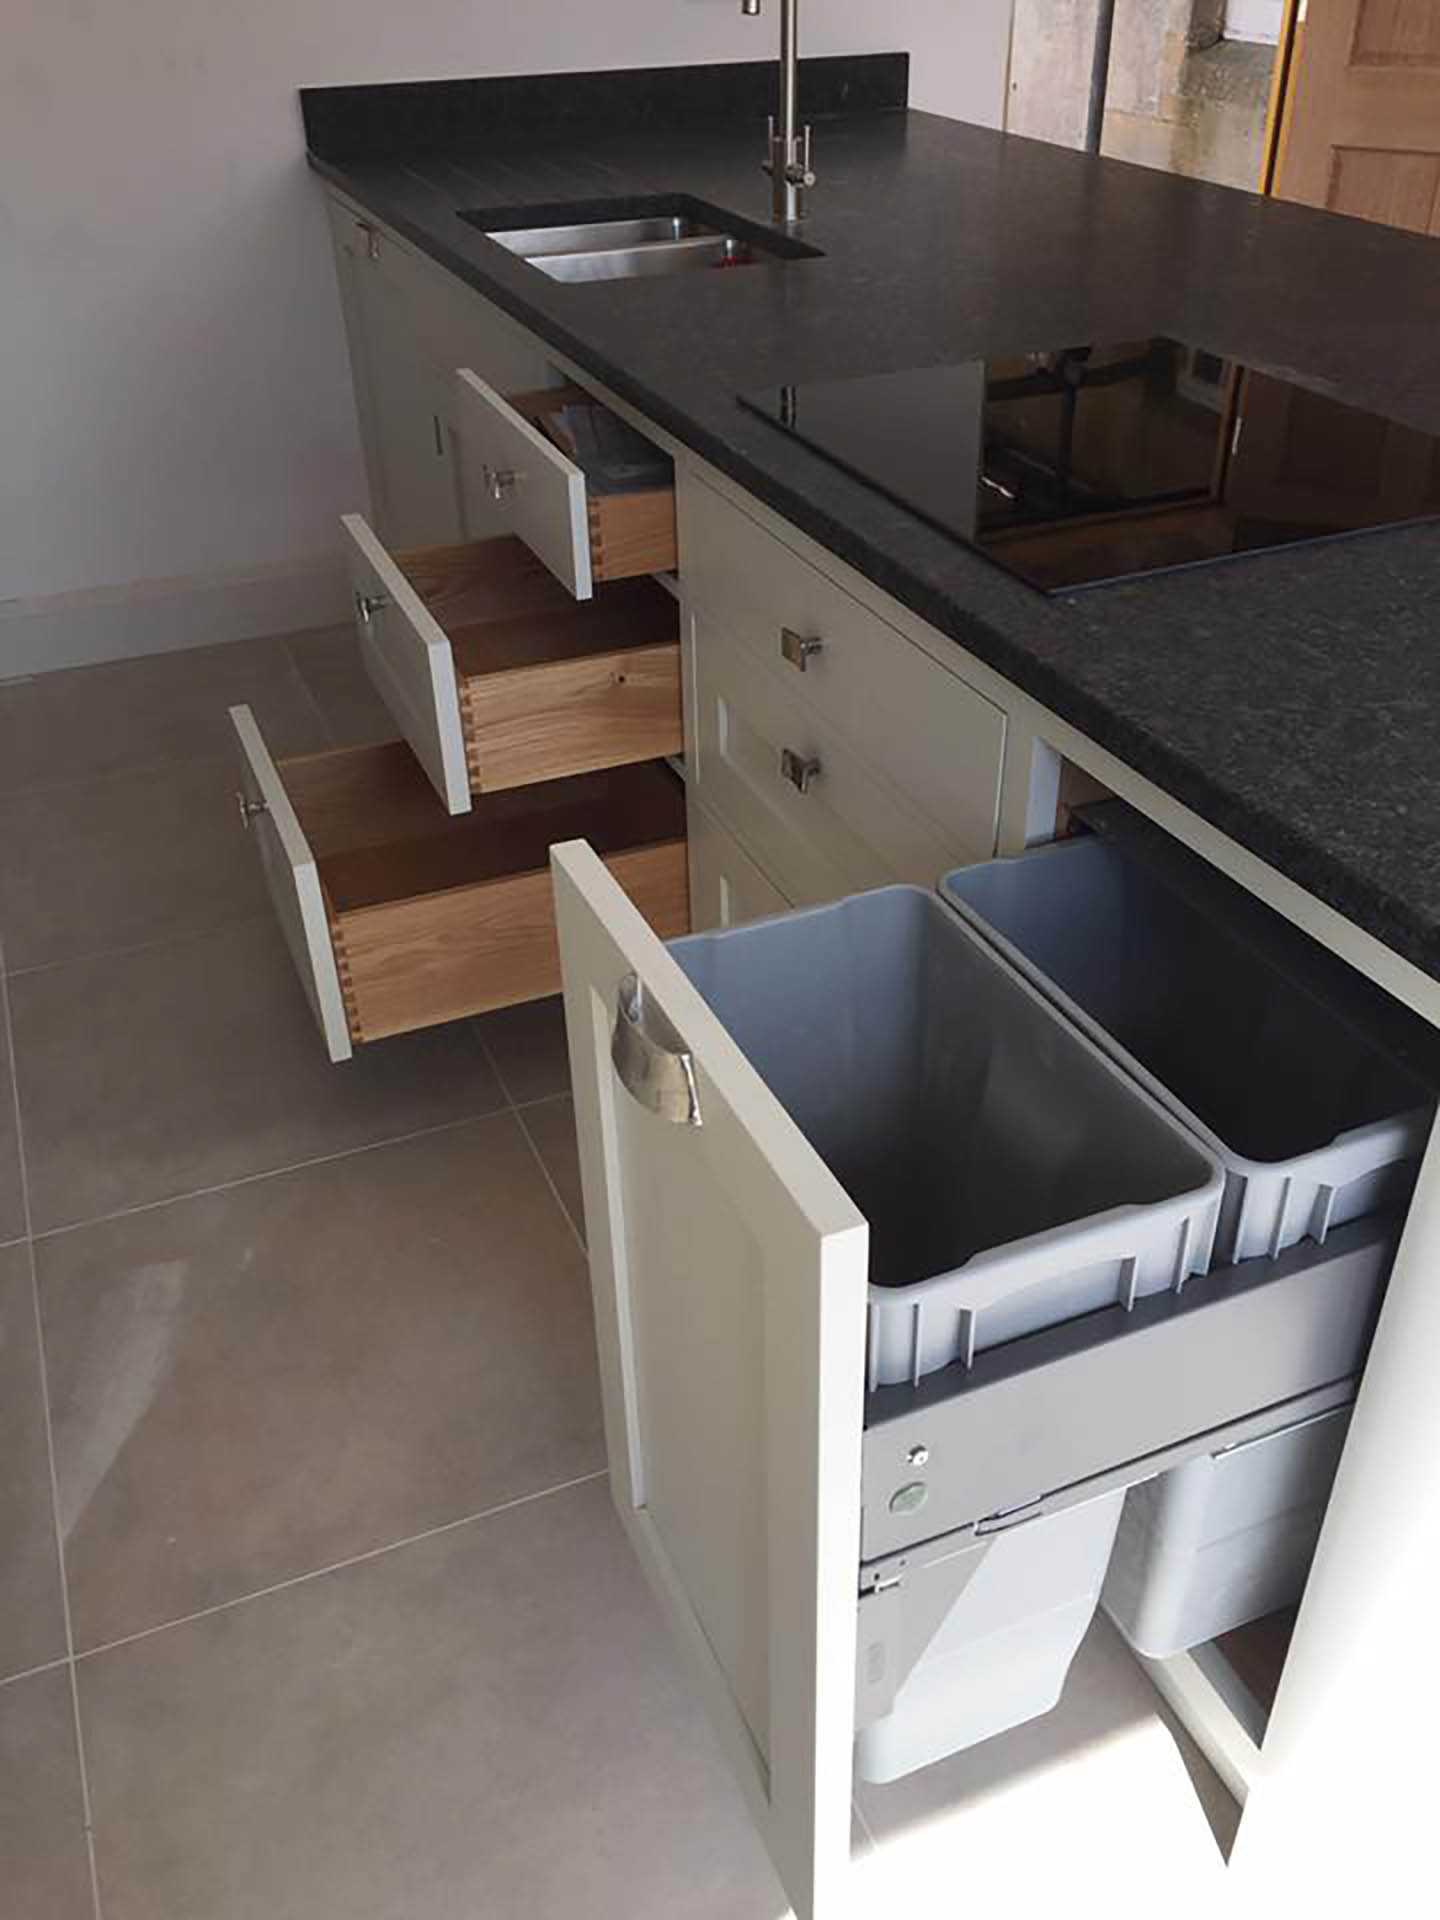 Kitchen cupboards showing some open drawers and a slide out bin.